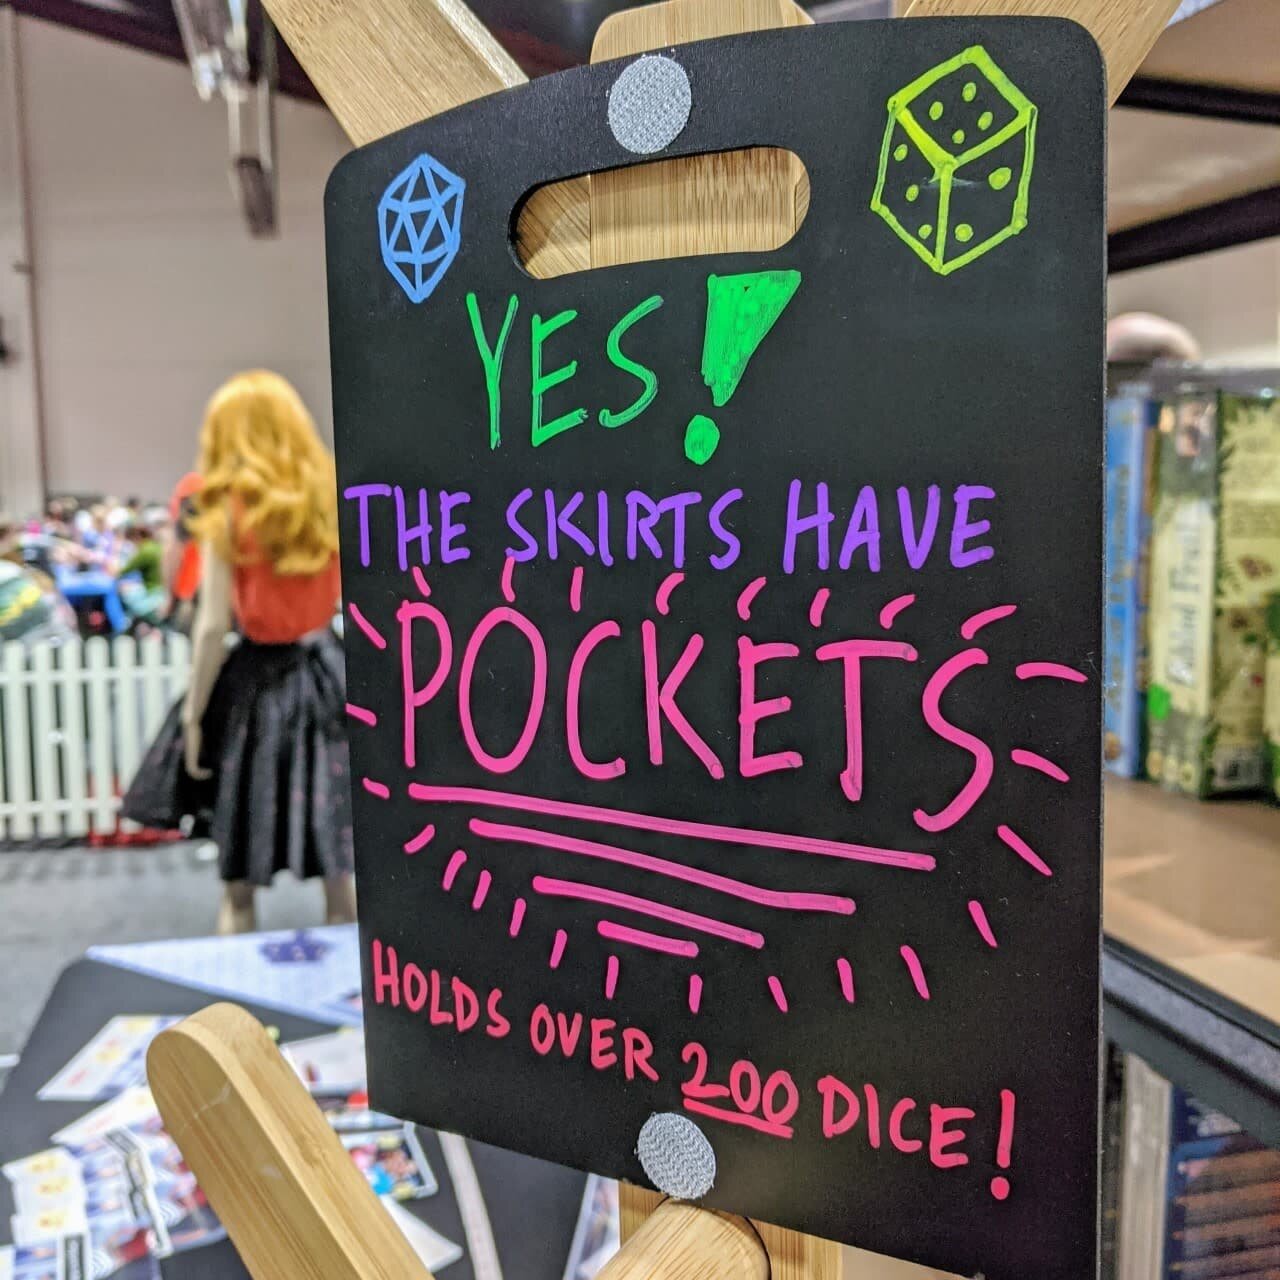 We'd always get the same question at cons, so we ended up just making a sign! 🎲
⠀
#smallbusinessau #smallbusinesses #smallbusinesswoman #boardgamegeek #tabletopgames #boardgamegeeks #boardgamers #smallbusinessesrock #jeuxdesociete #brettspiele #boar